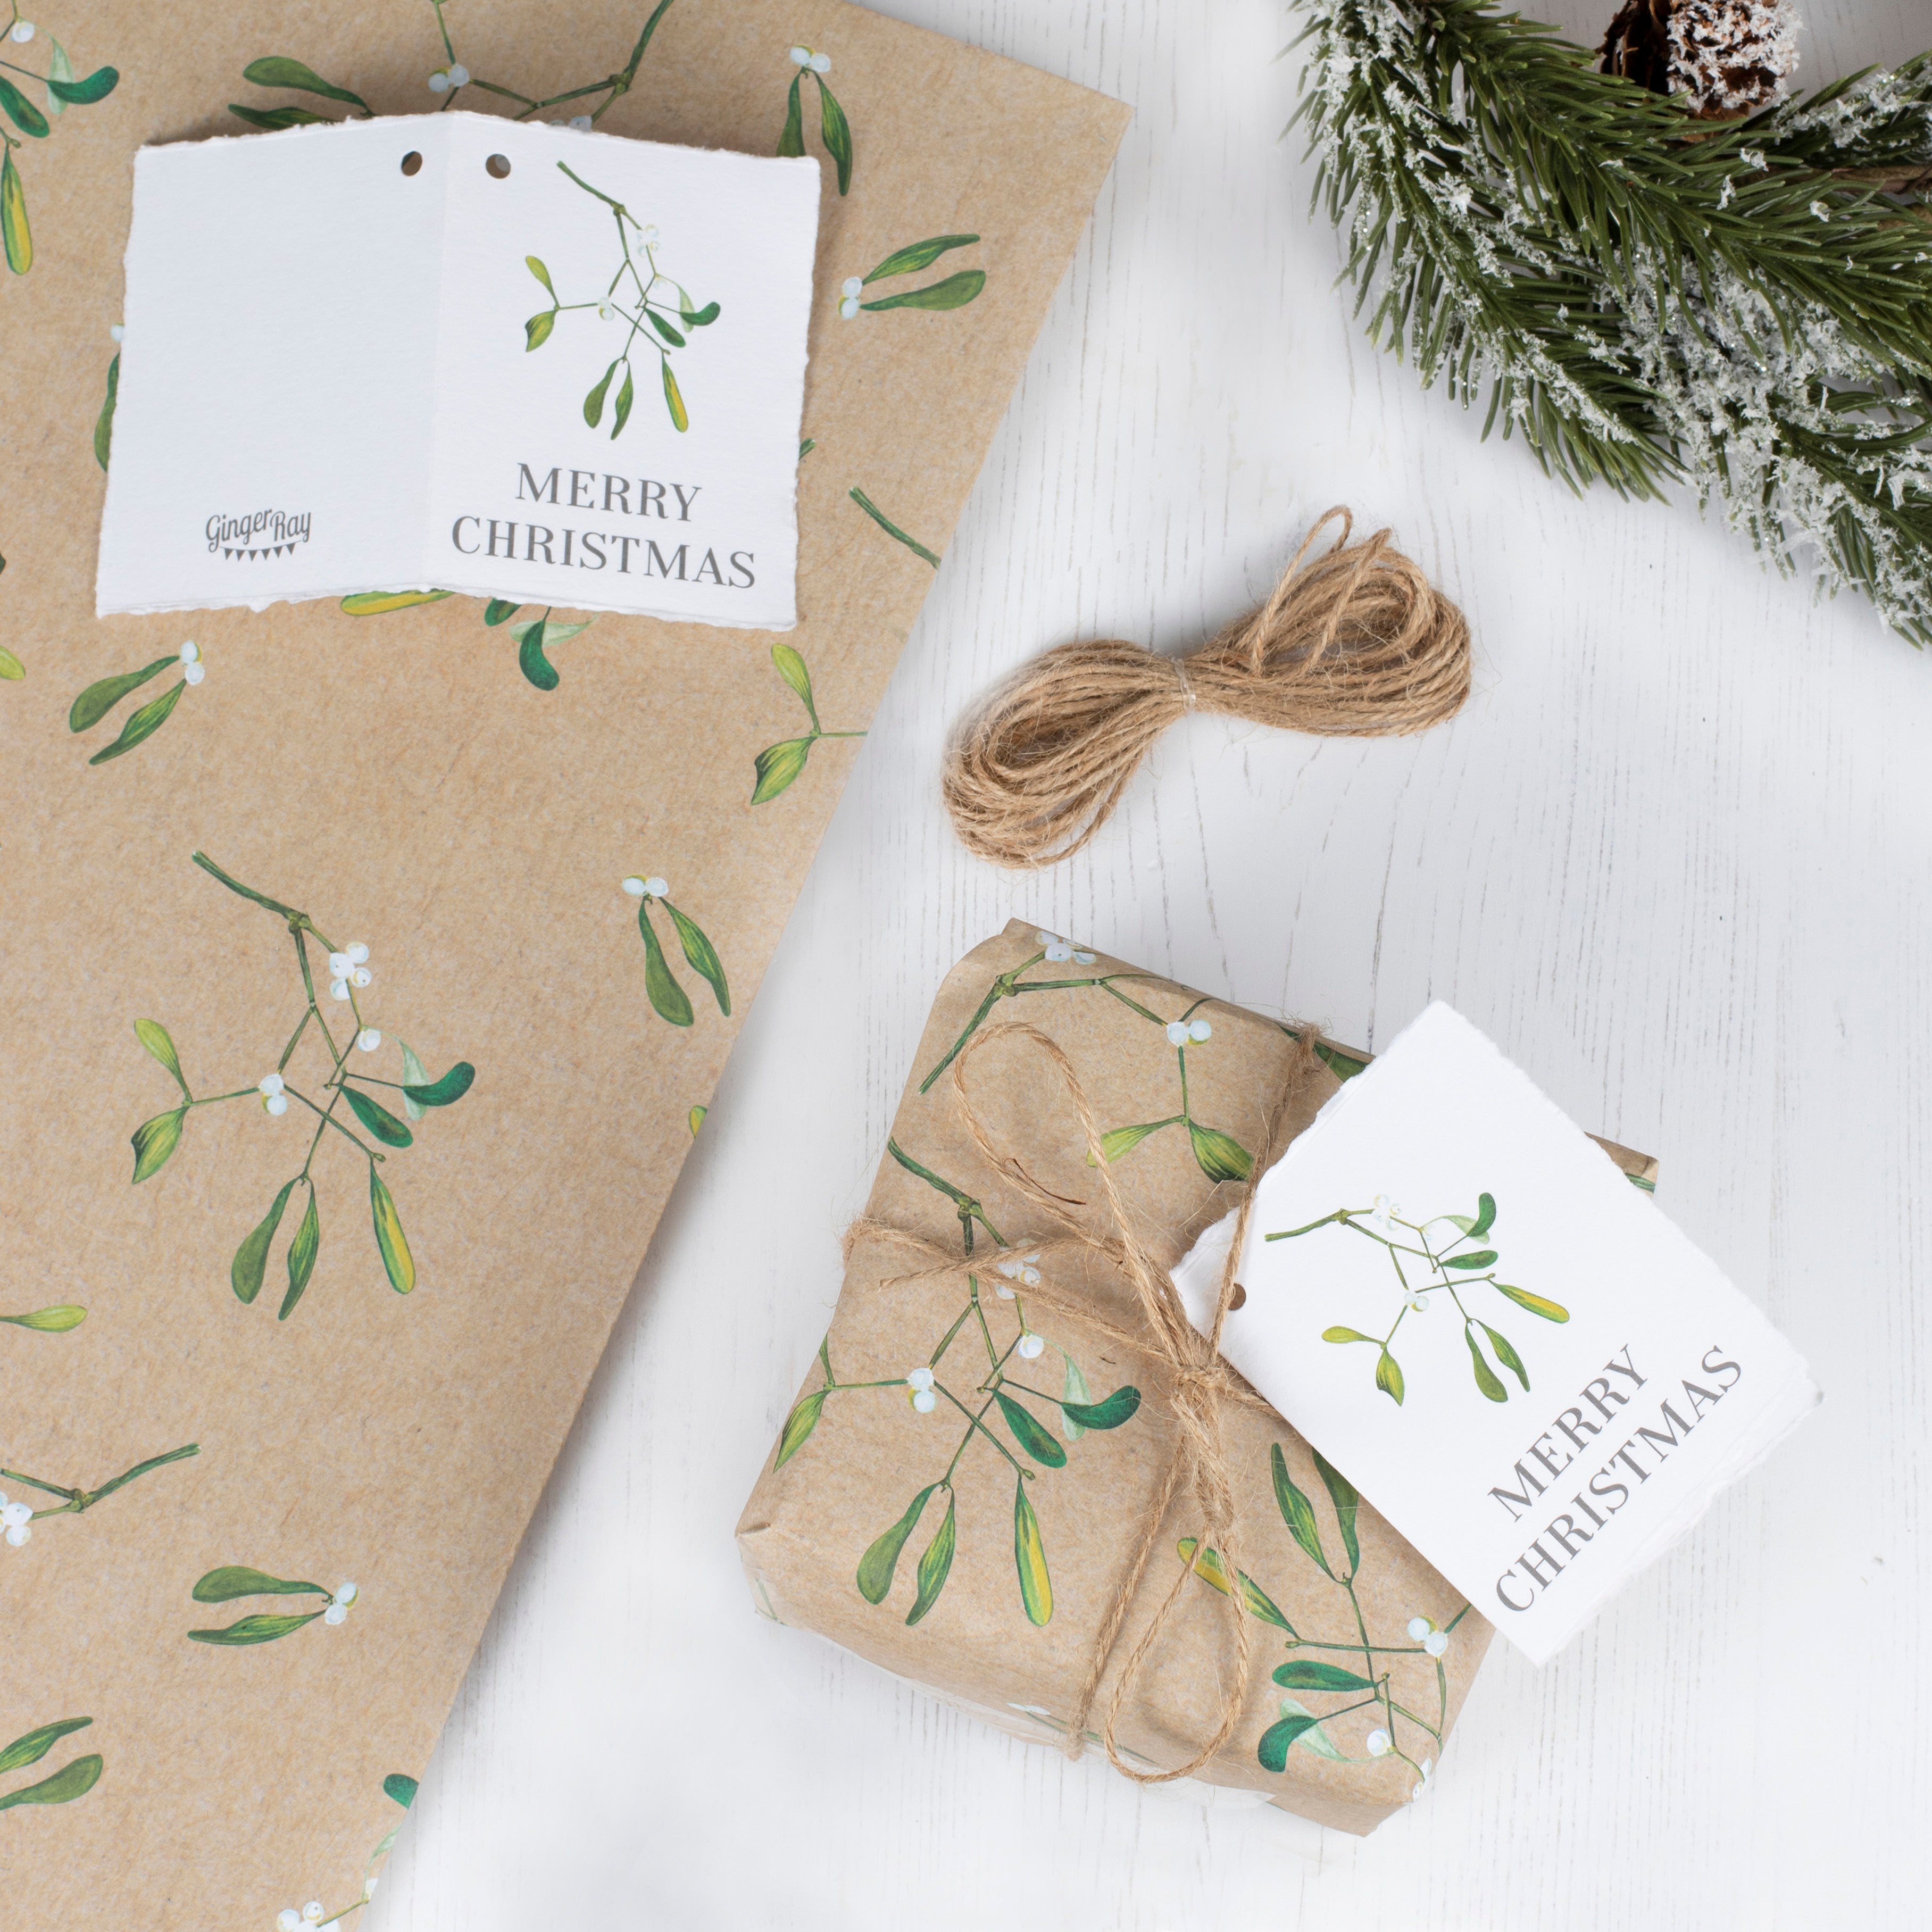 Wrapping paper with thread and greeting card